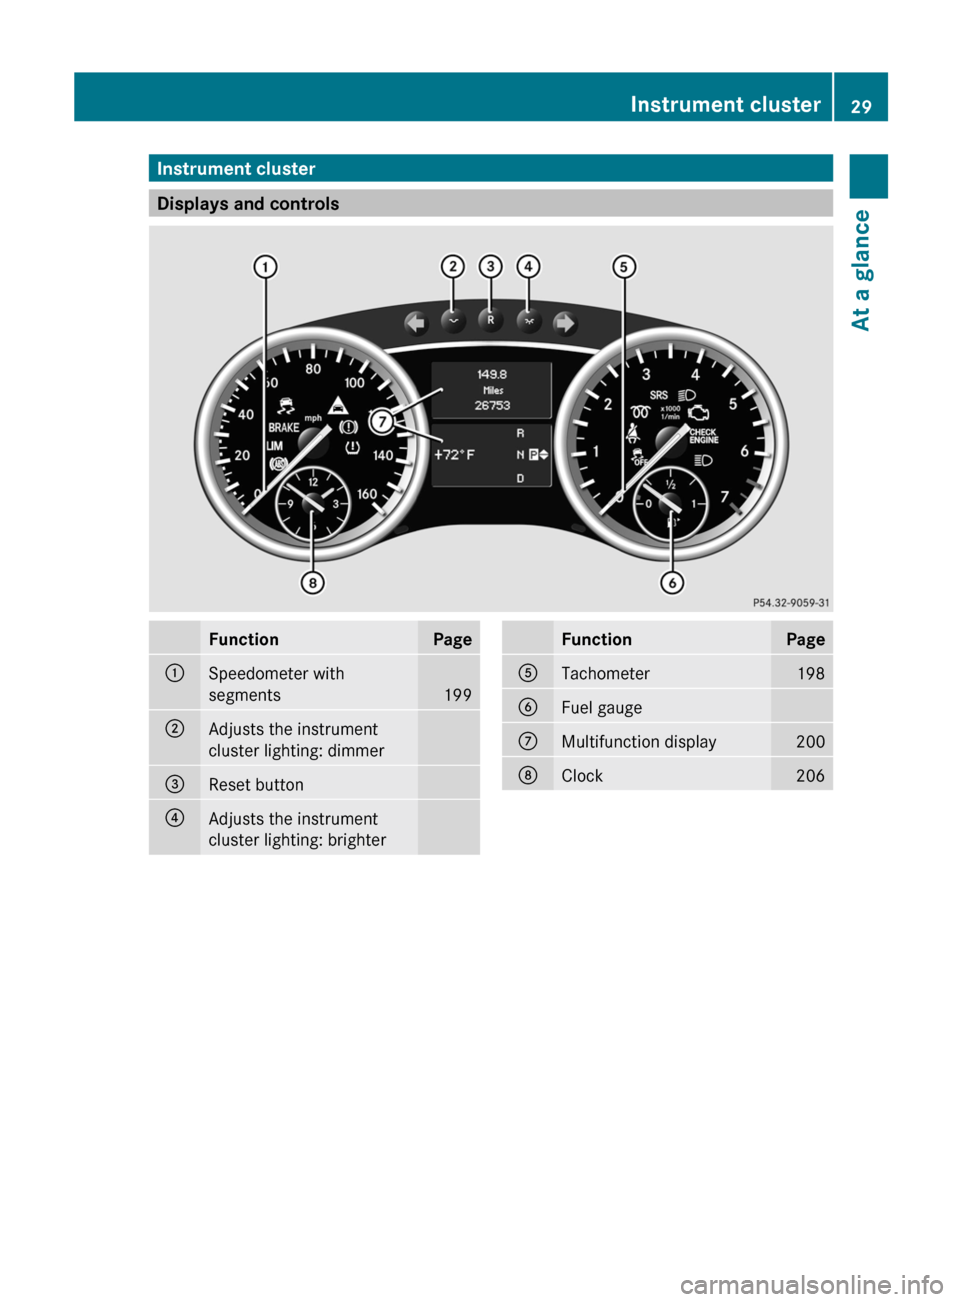 MERCEDES-BENZ R-Class 2012 W251 User Guide Instrument cluster
Displays and controls
FunctionPage:Speedometer with
segments
199
;Adjusts the instrument
cluster lighting: dimmer=Reset button?Adjusts the instrument
cluster lighting: brighterFunct